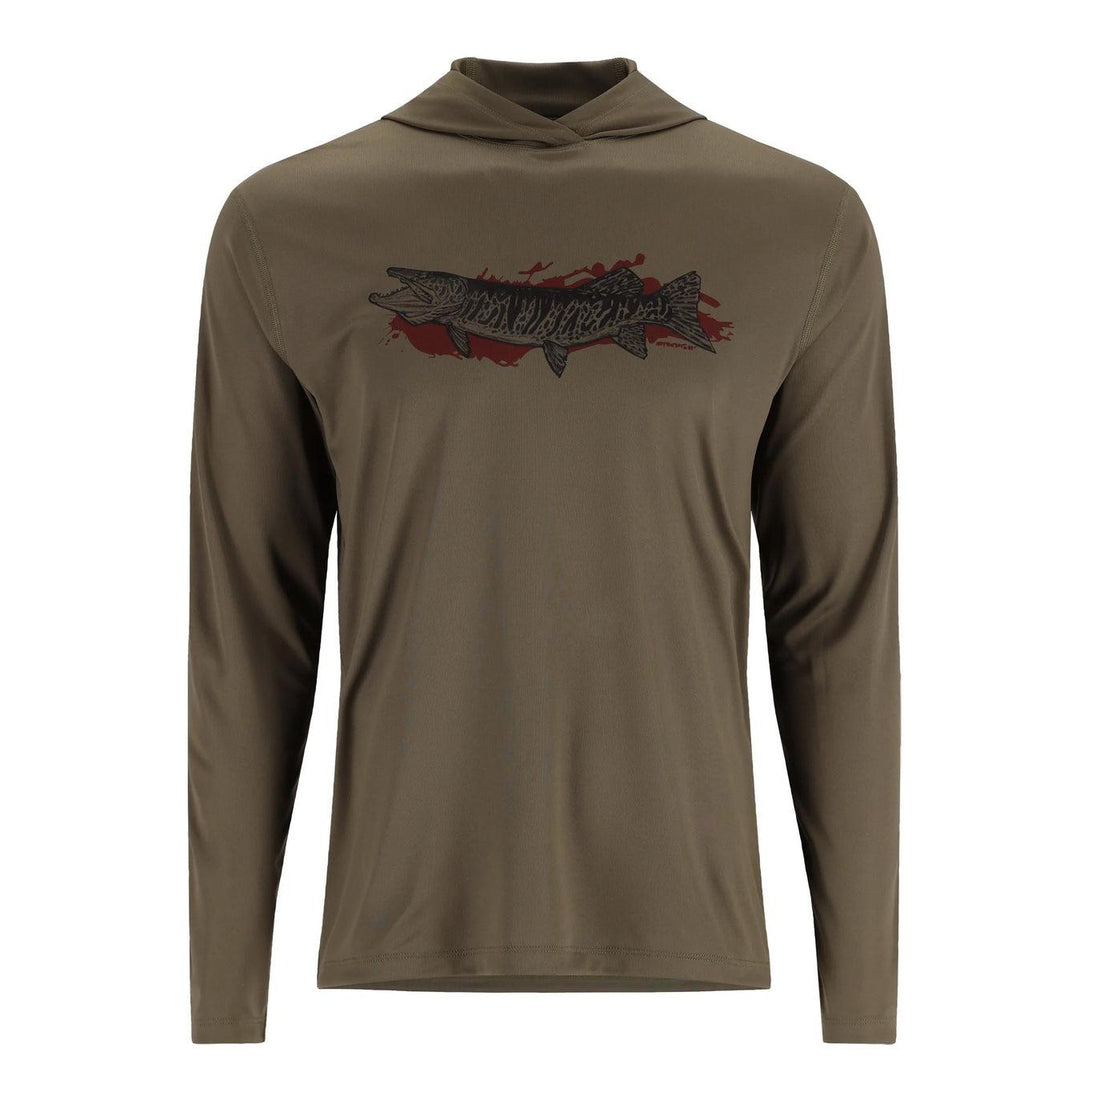 View of Hoodies-Sweatshirts M's Tech Hoody - Artist Series L Dark Stone/Musky available at EZOKO Pike and Musky Shop